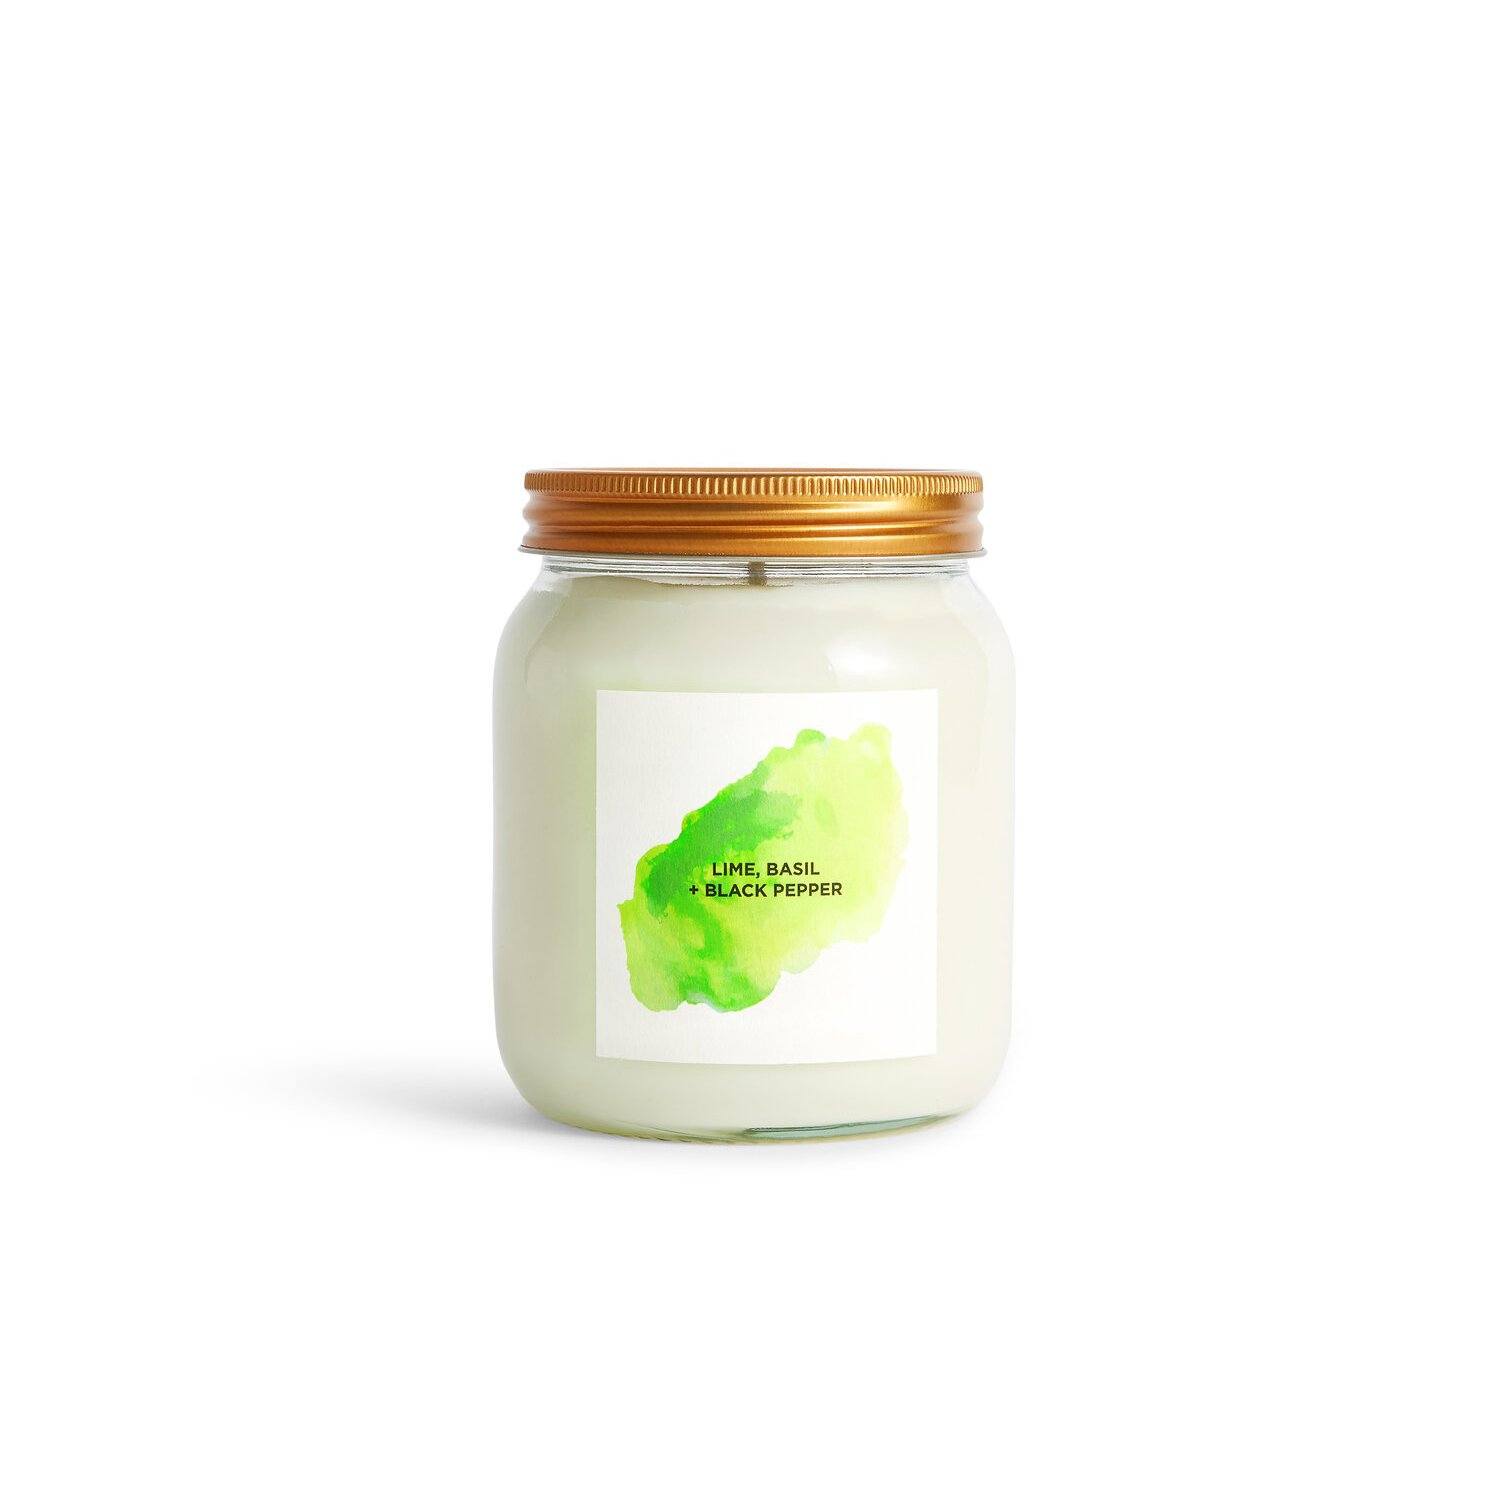 Lime, Basil + Black Pepper Aromatherapy Candle Kerzen Self Care Co. - Genuine Selection